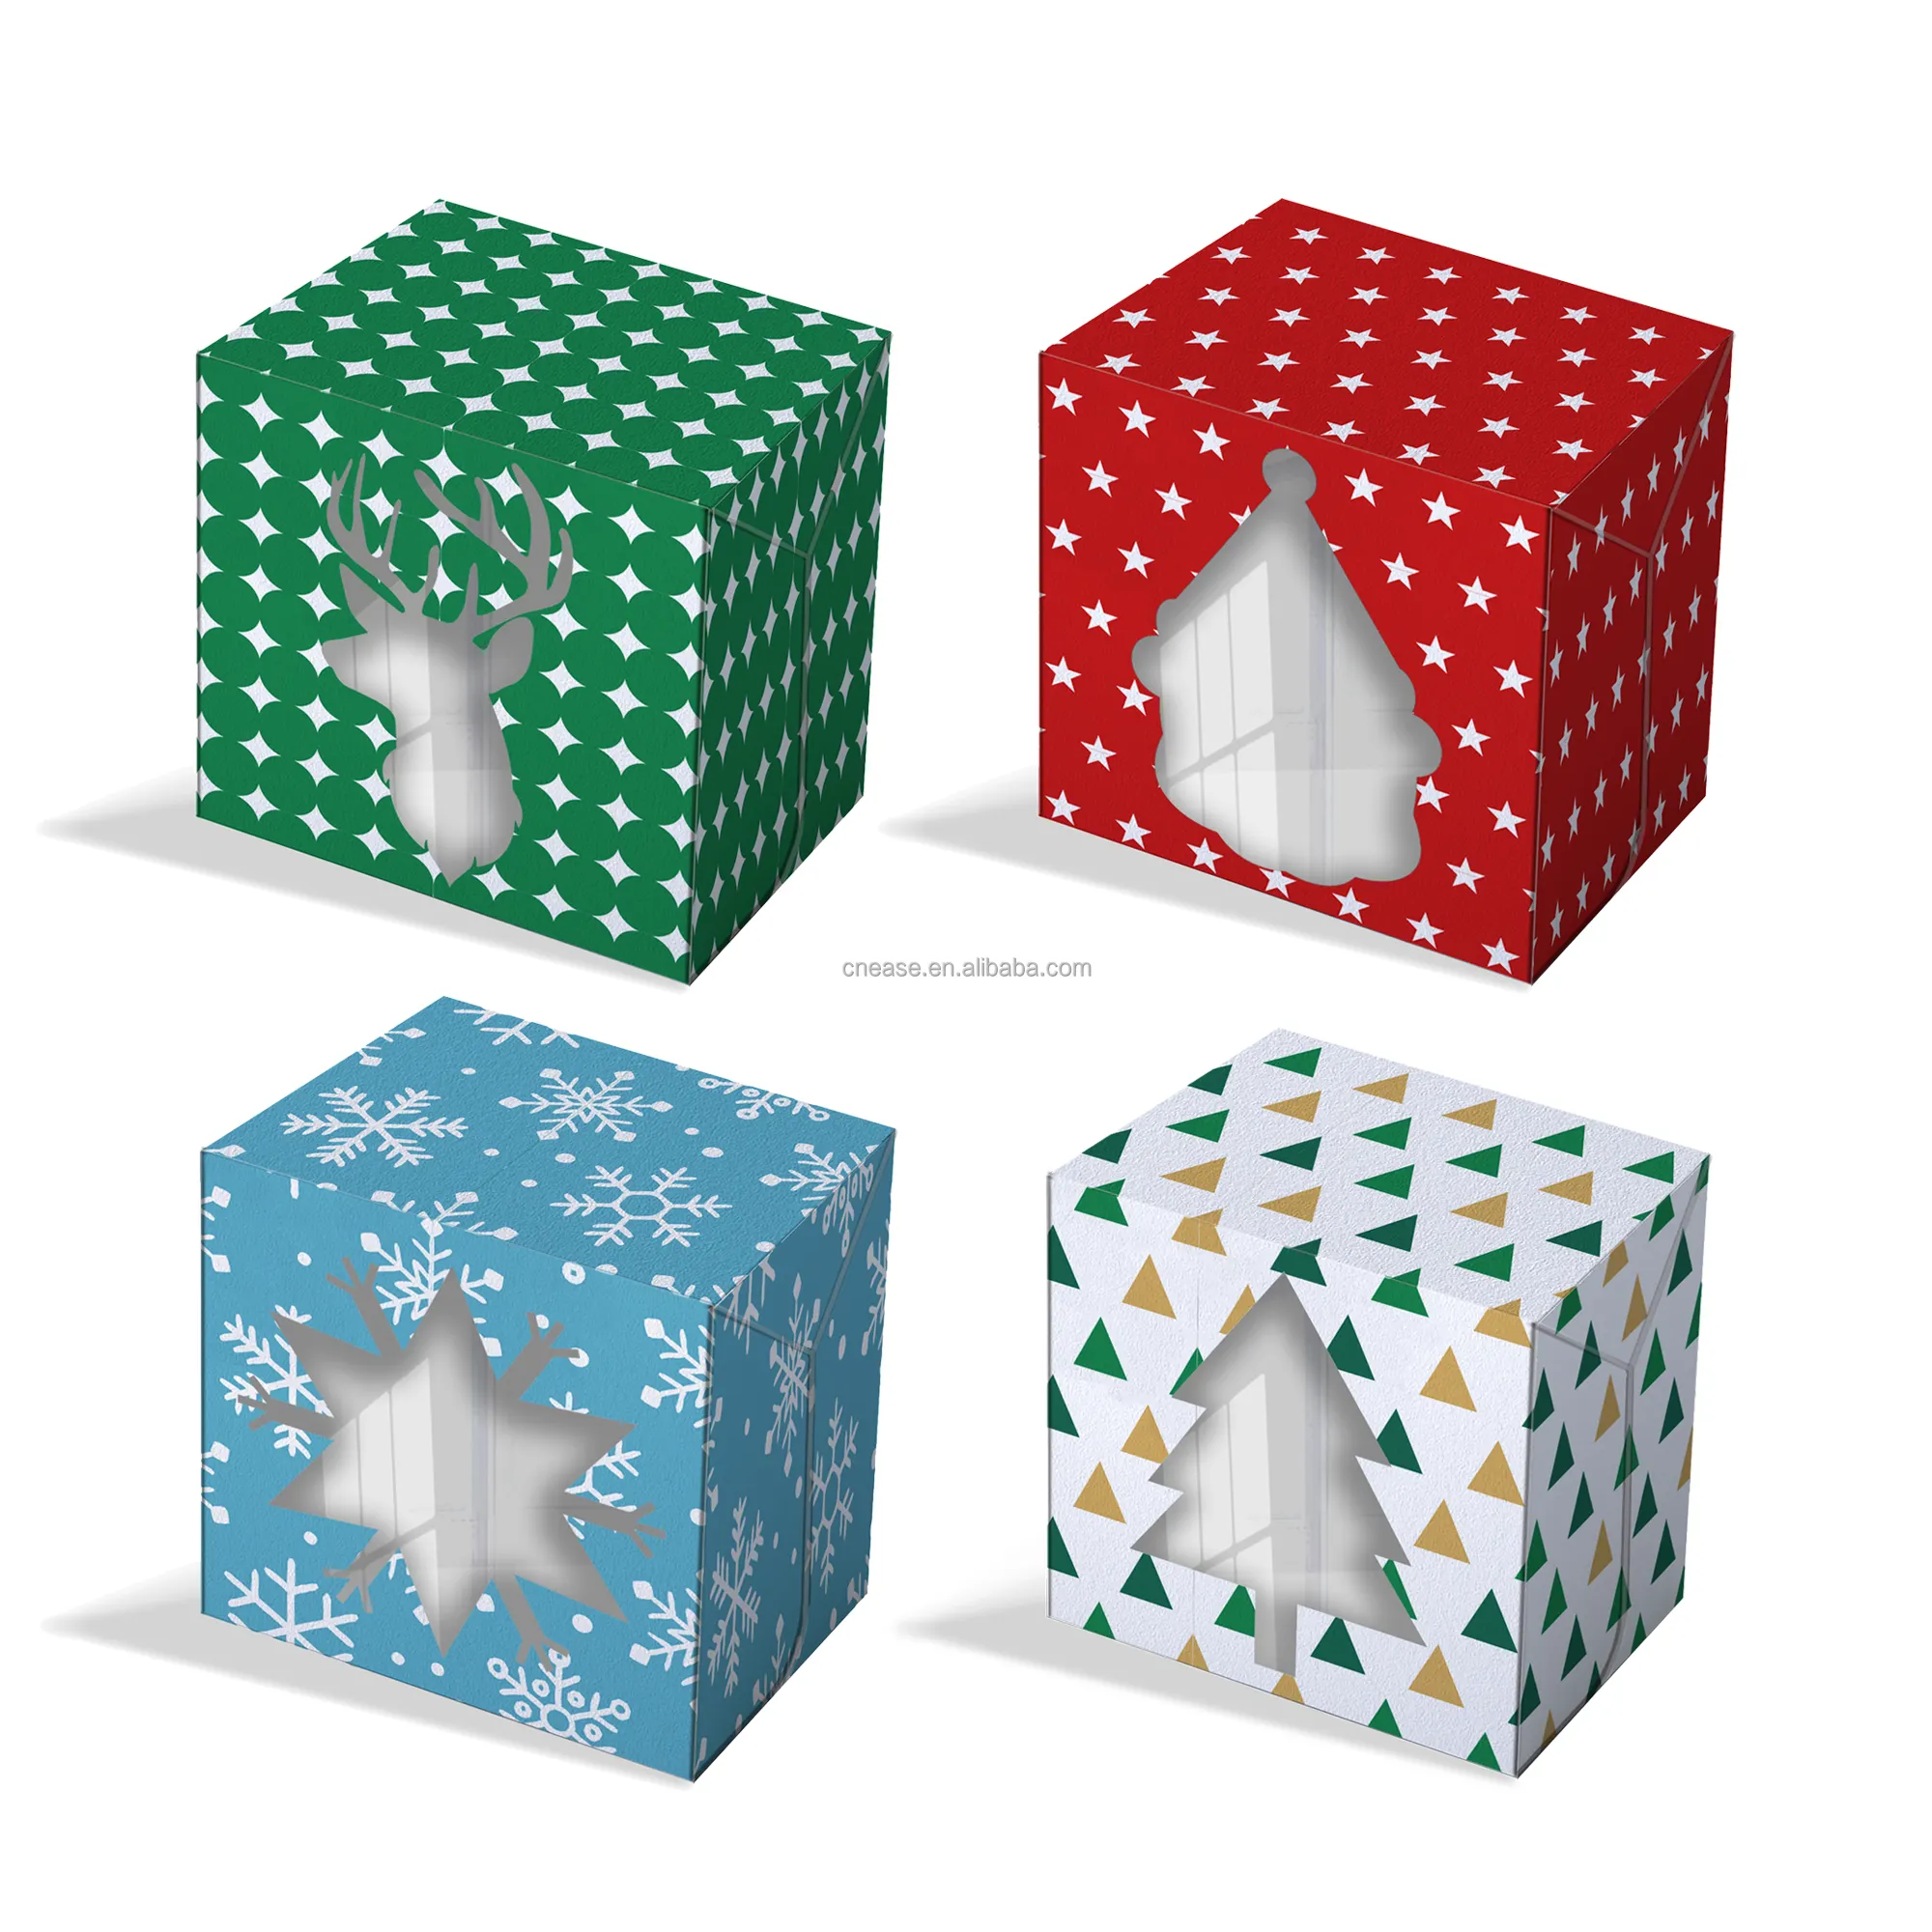 HZ001 Christmas Party Gift Transparent Window Paper Box for Cookie Candy Biscuit Packaging